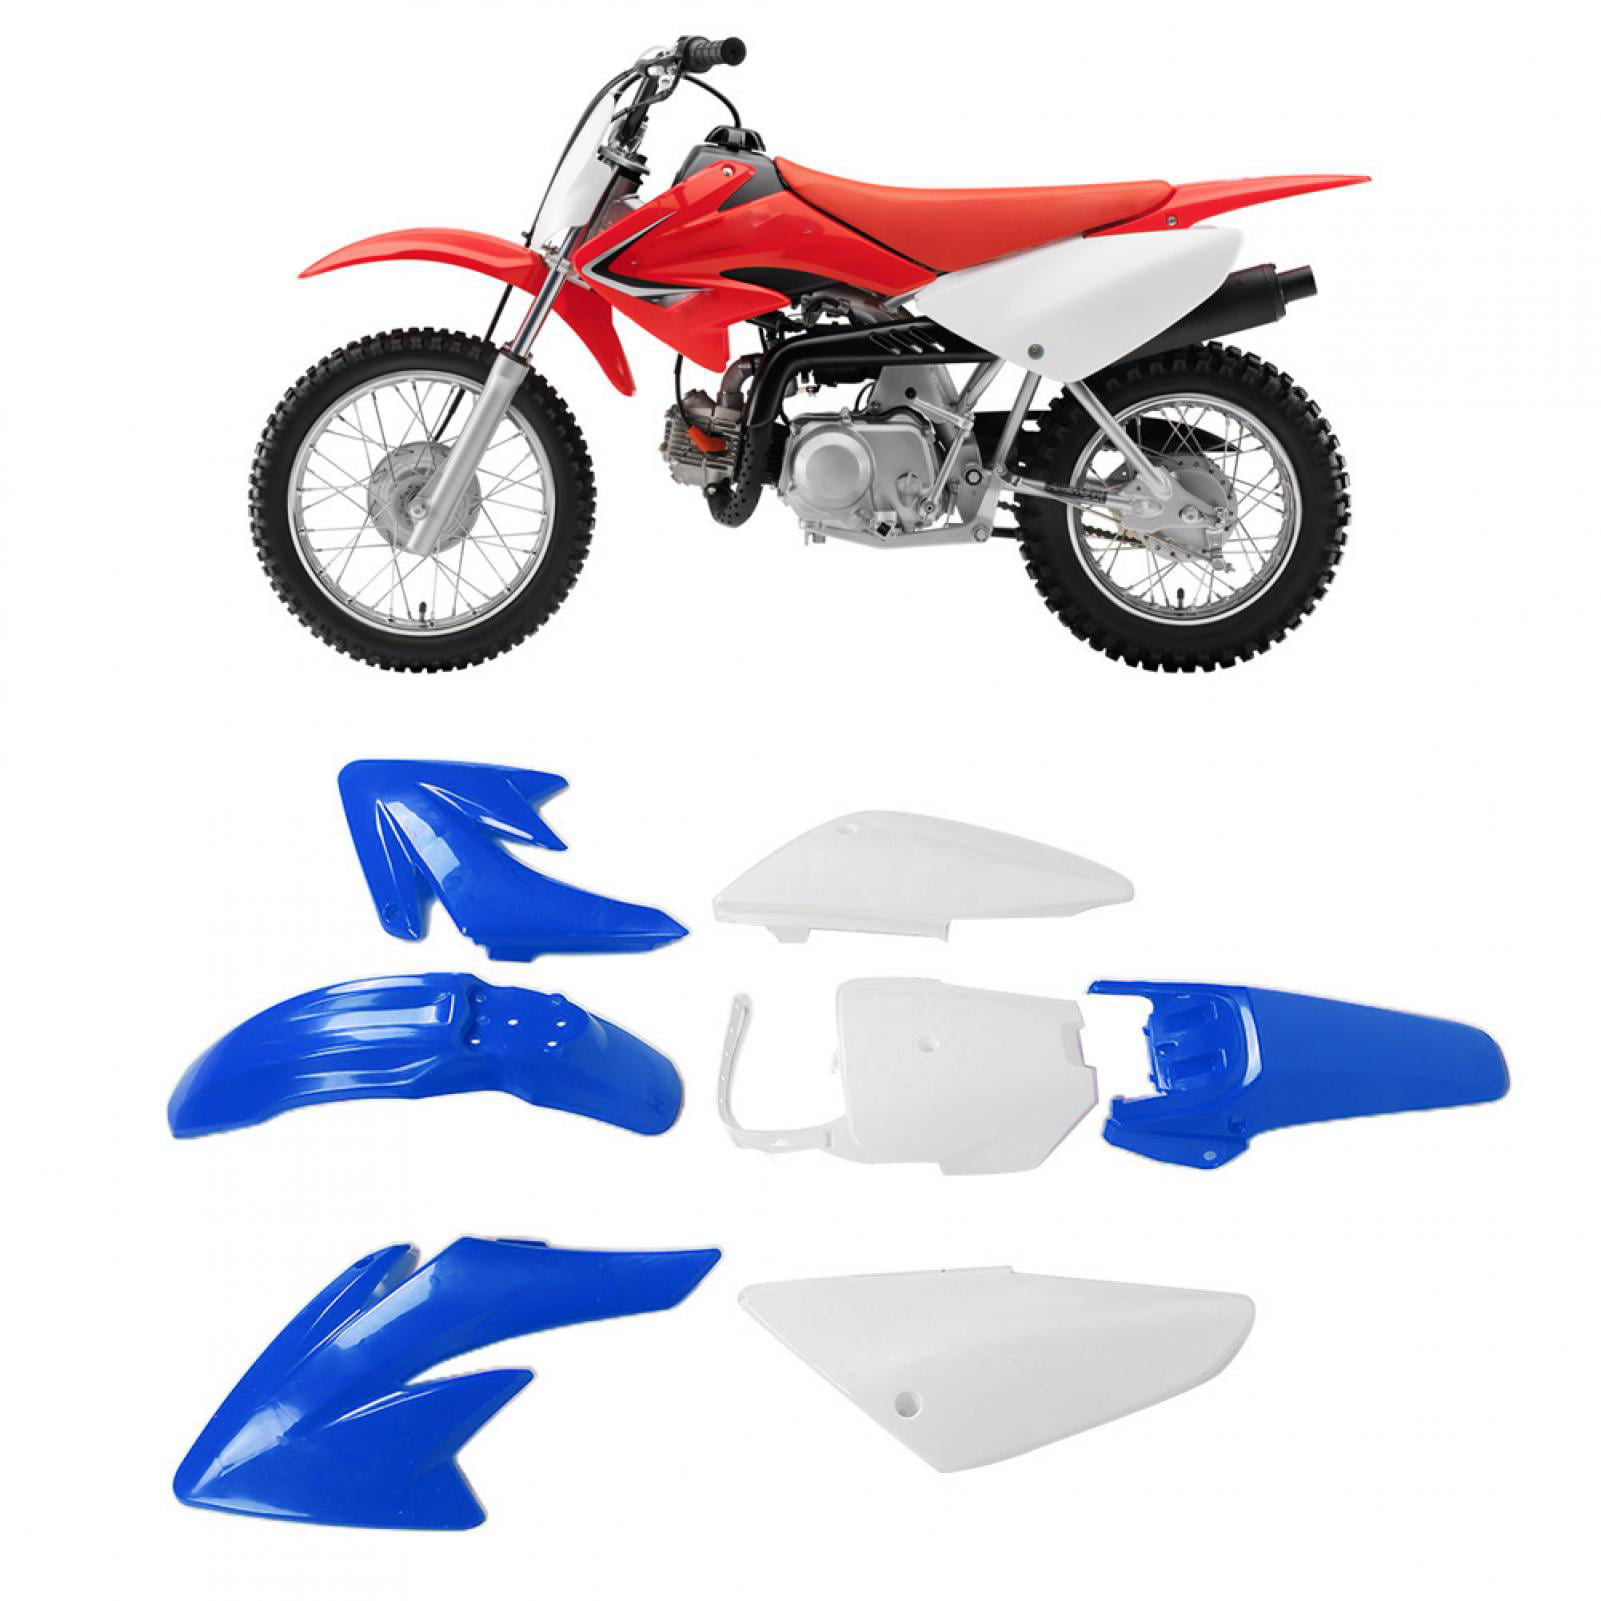 Replacement Blue Plastic Fairings Fender Kit for Dirtbikes Compatible with Honda CRF70 CRF70F CRF 70 